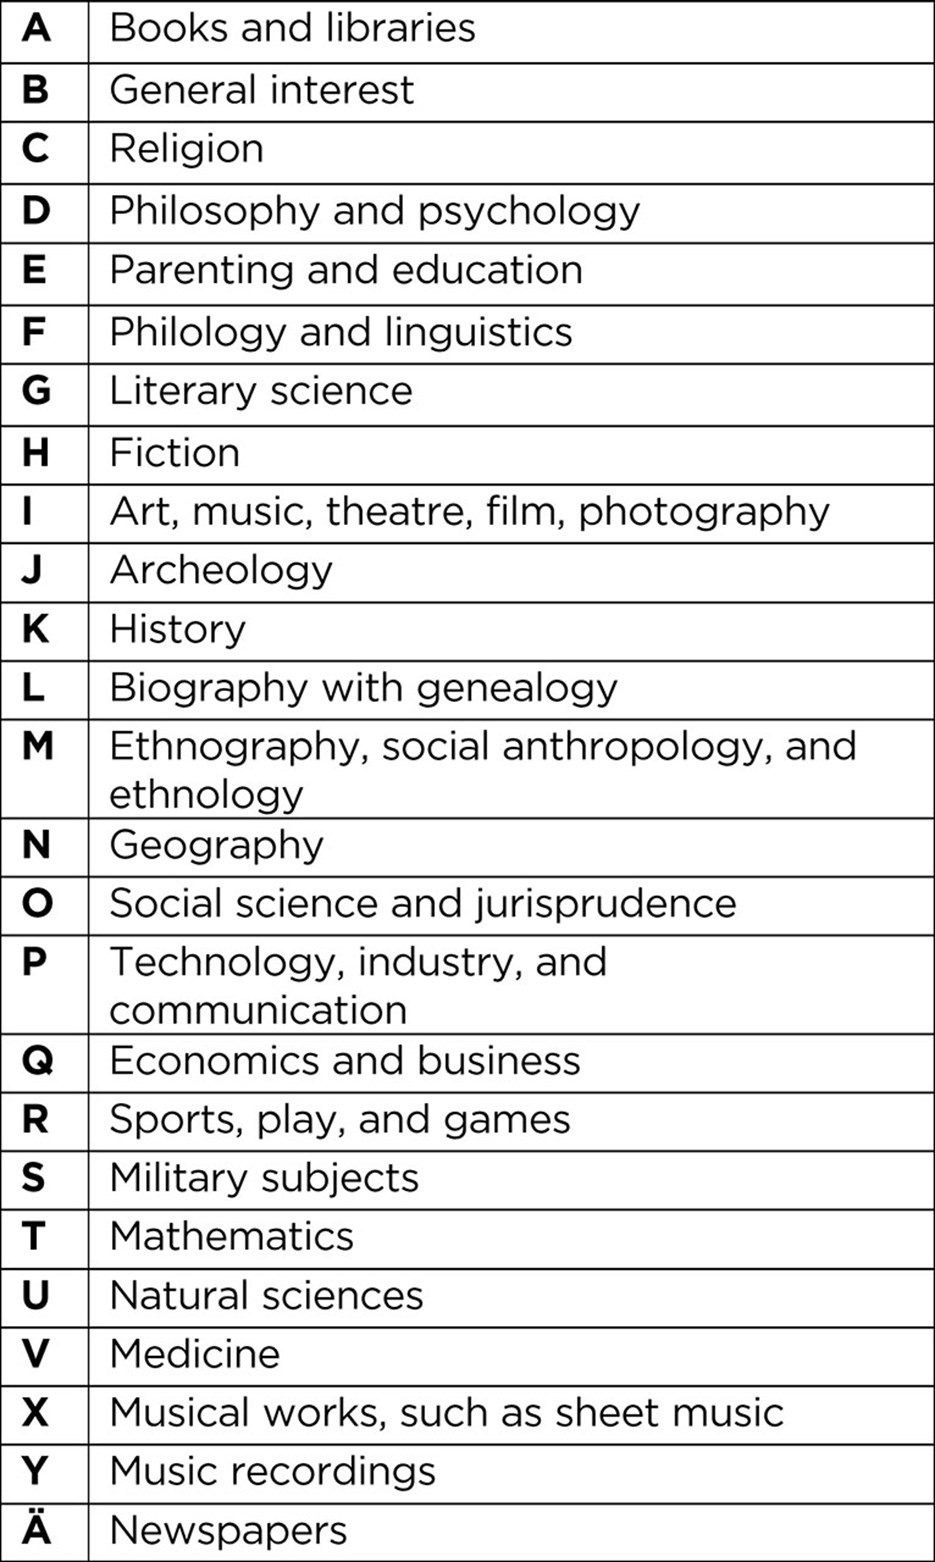 A table that summarises the main classes of the SAB system.